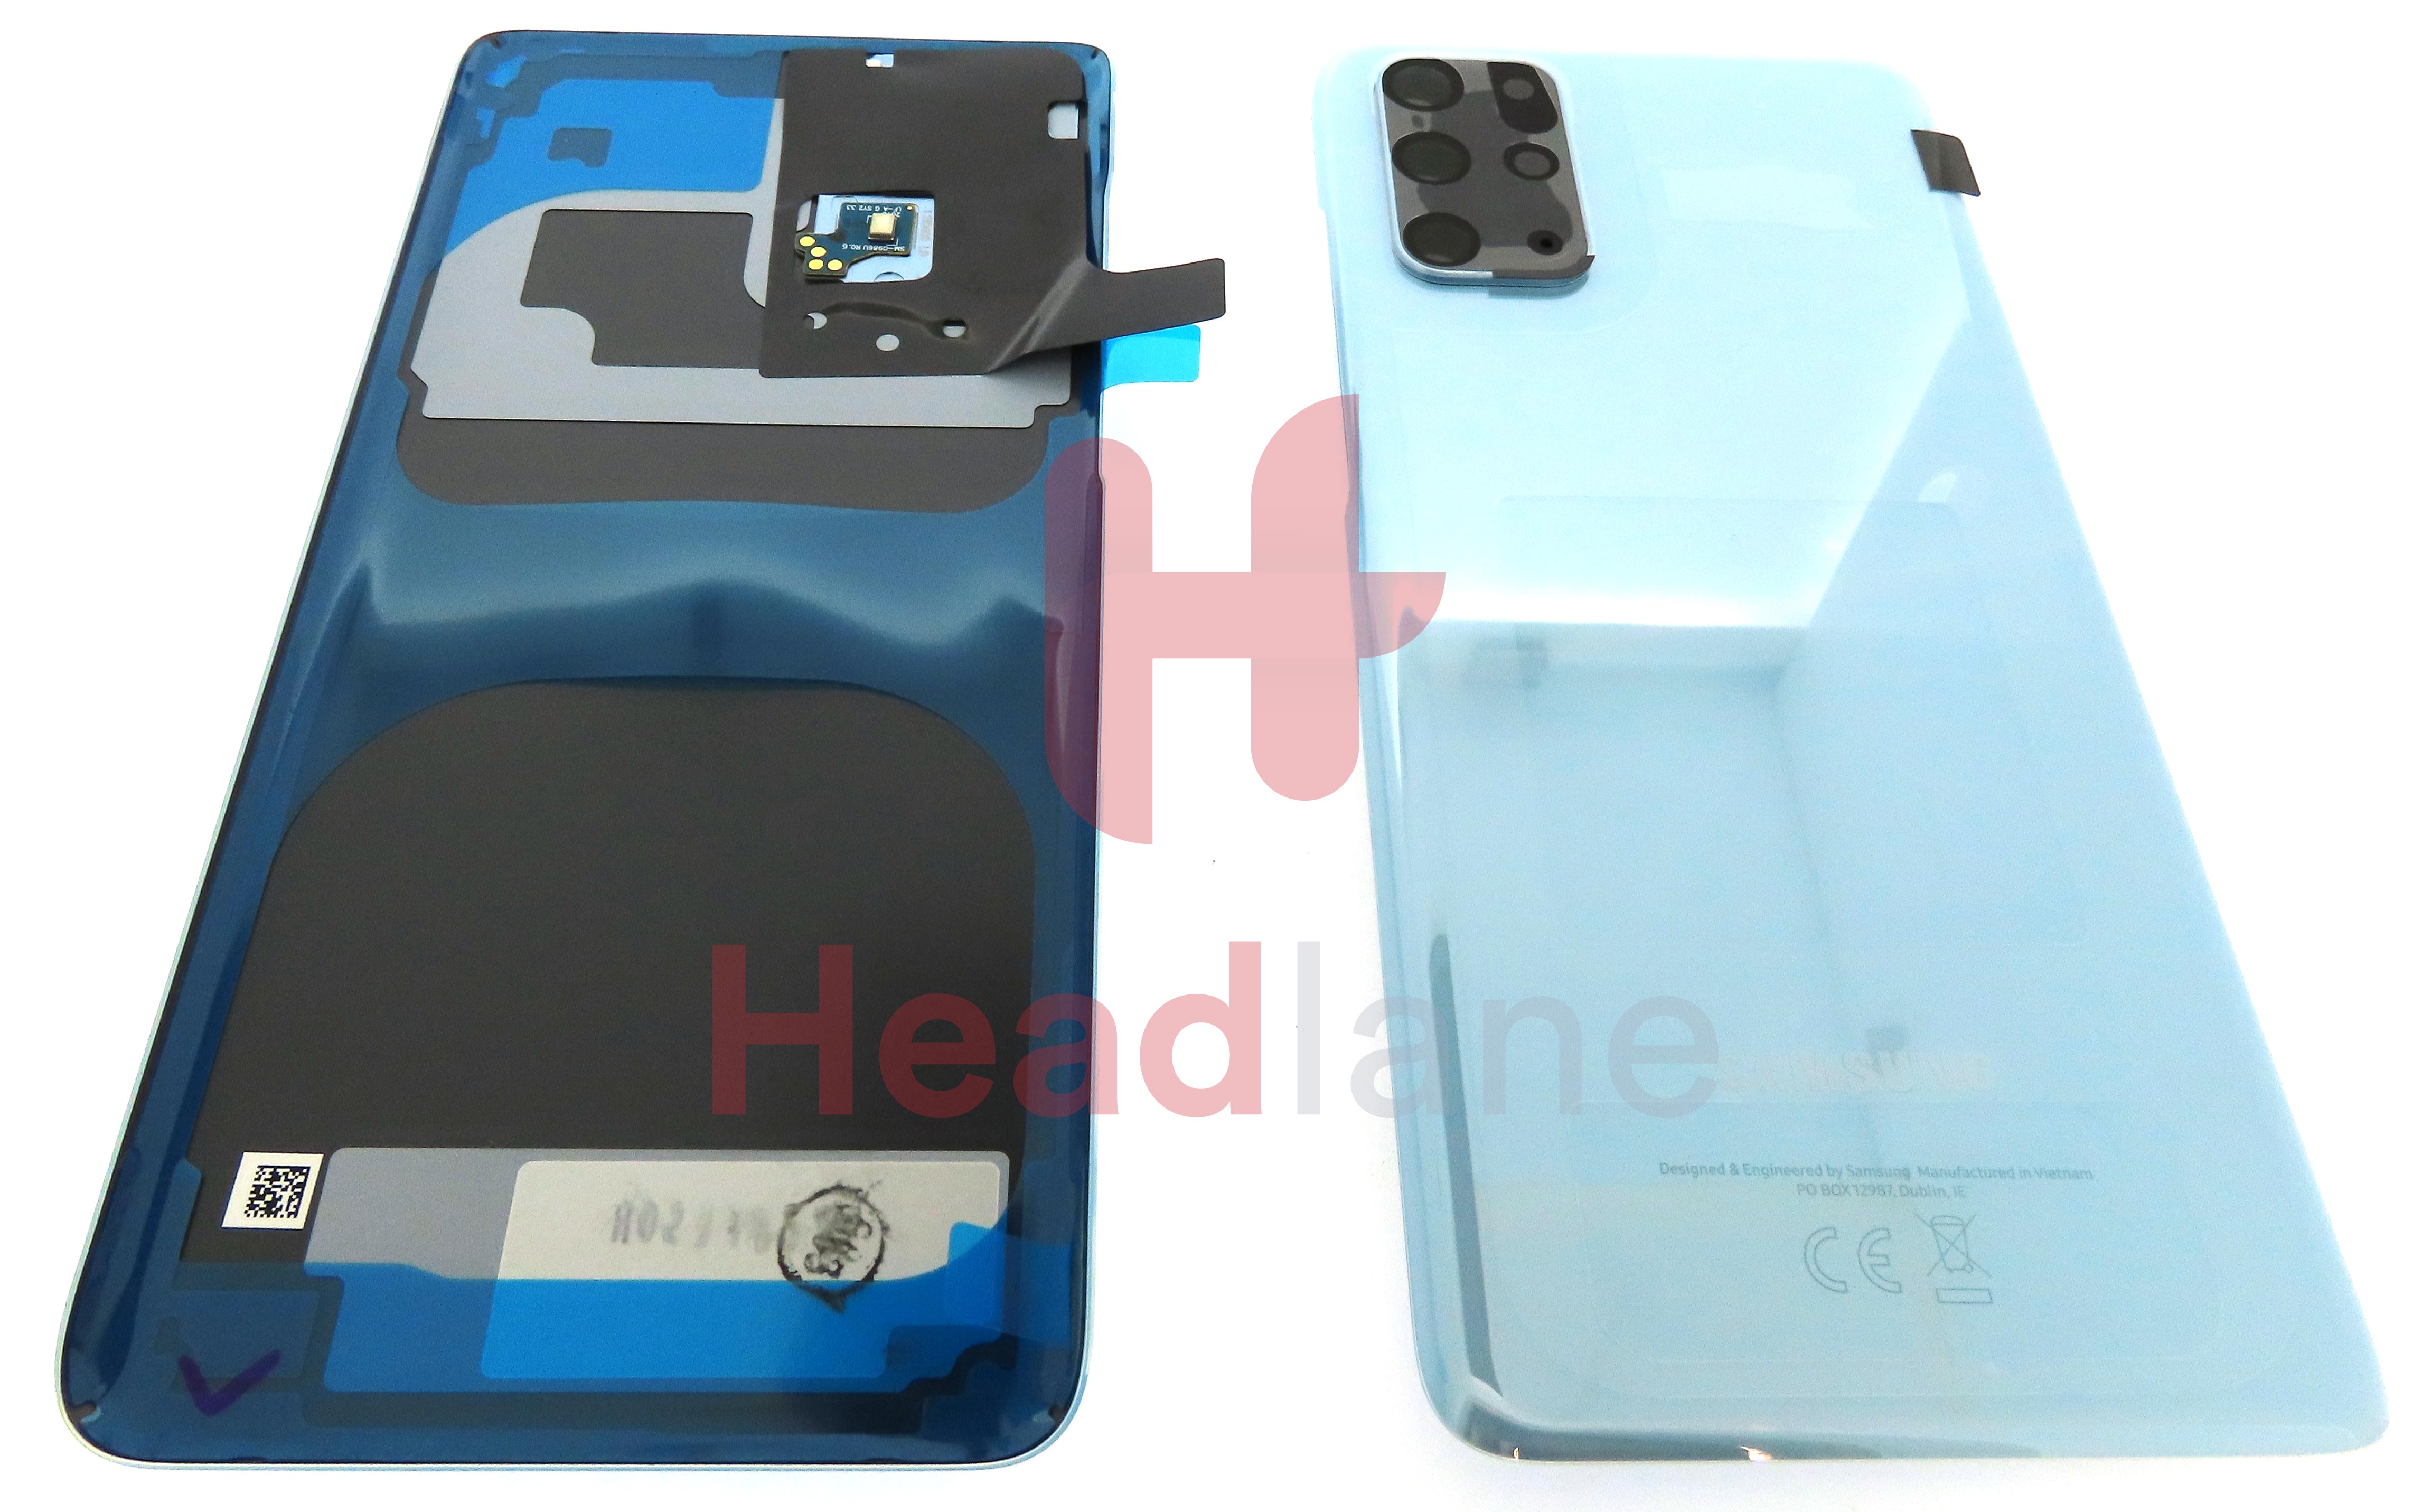 Samsung SM-G986 Galaxy S20+ / S20 Plus Back / Battery Cover - Cloud Blue